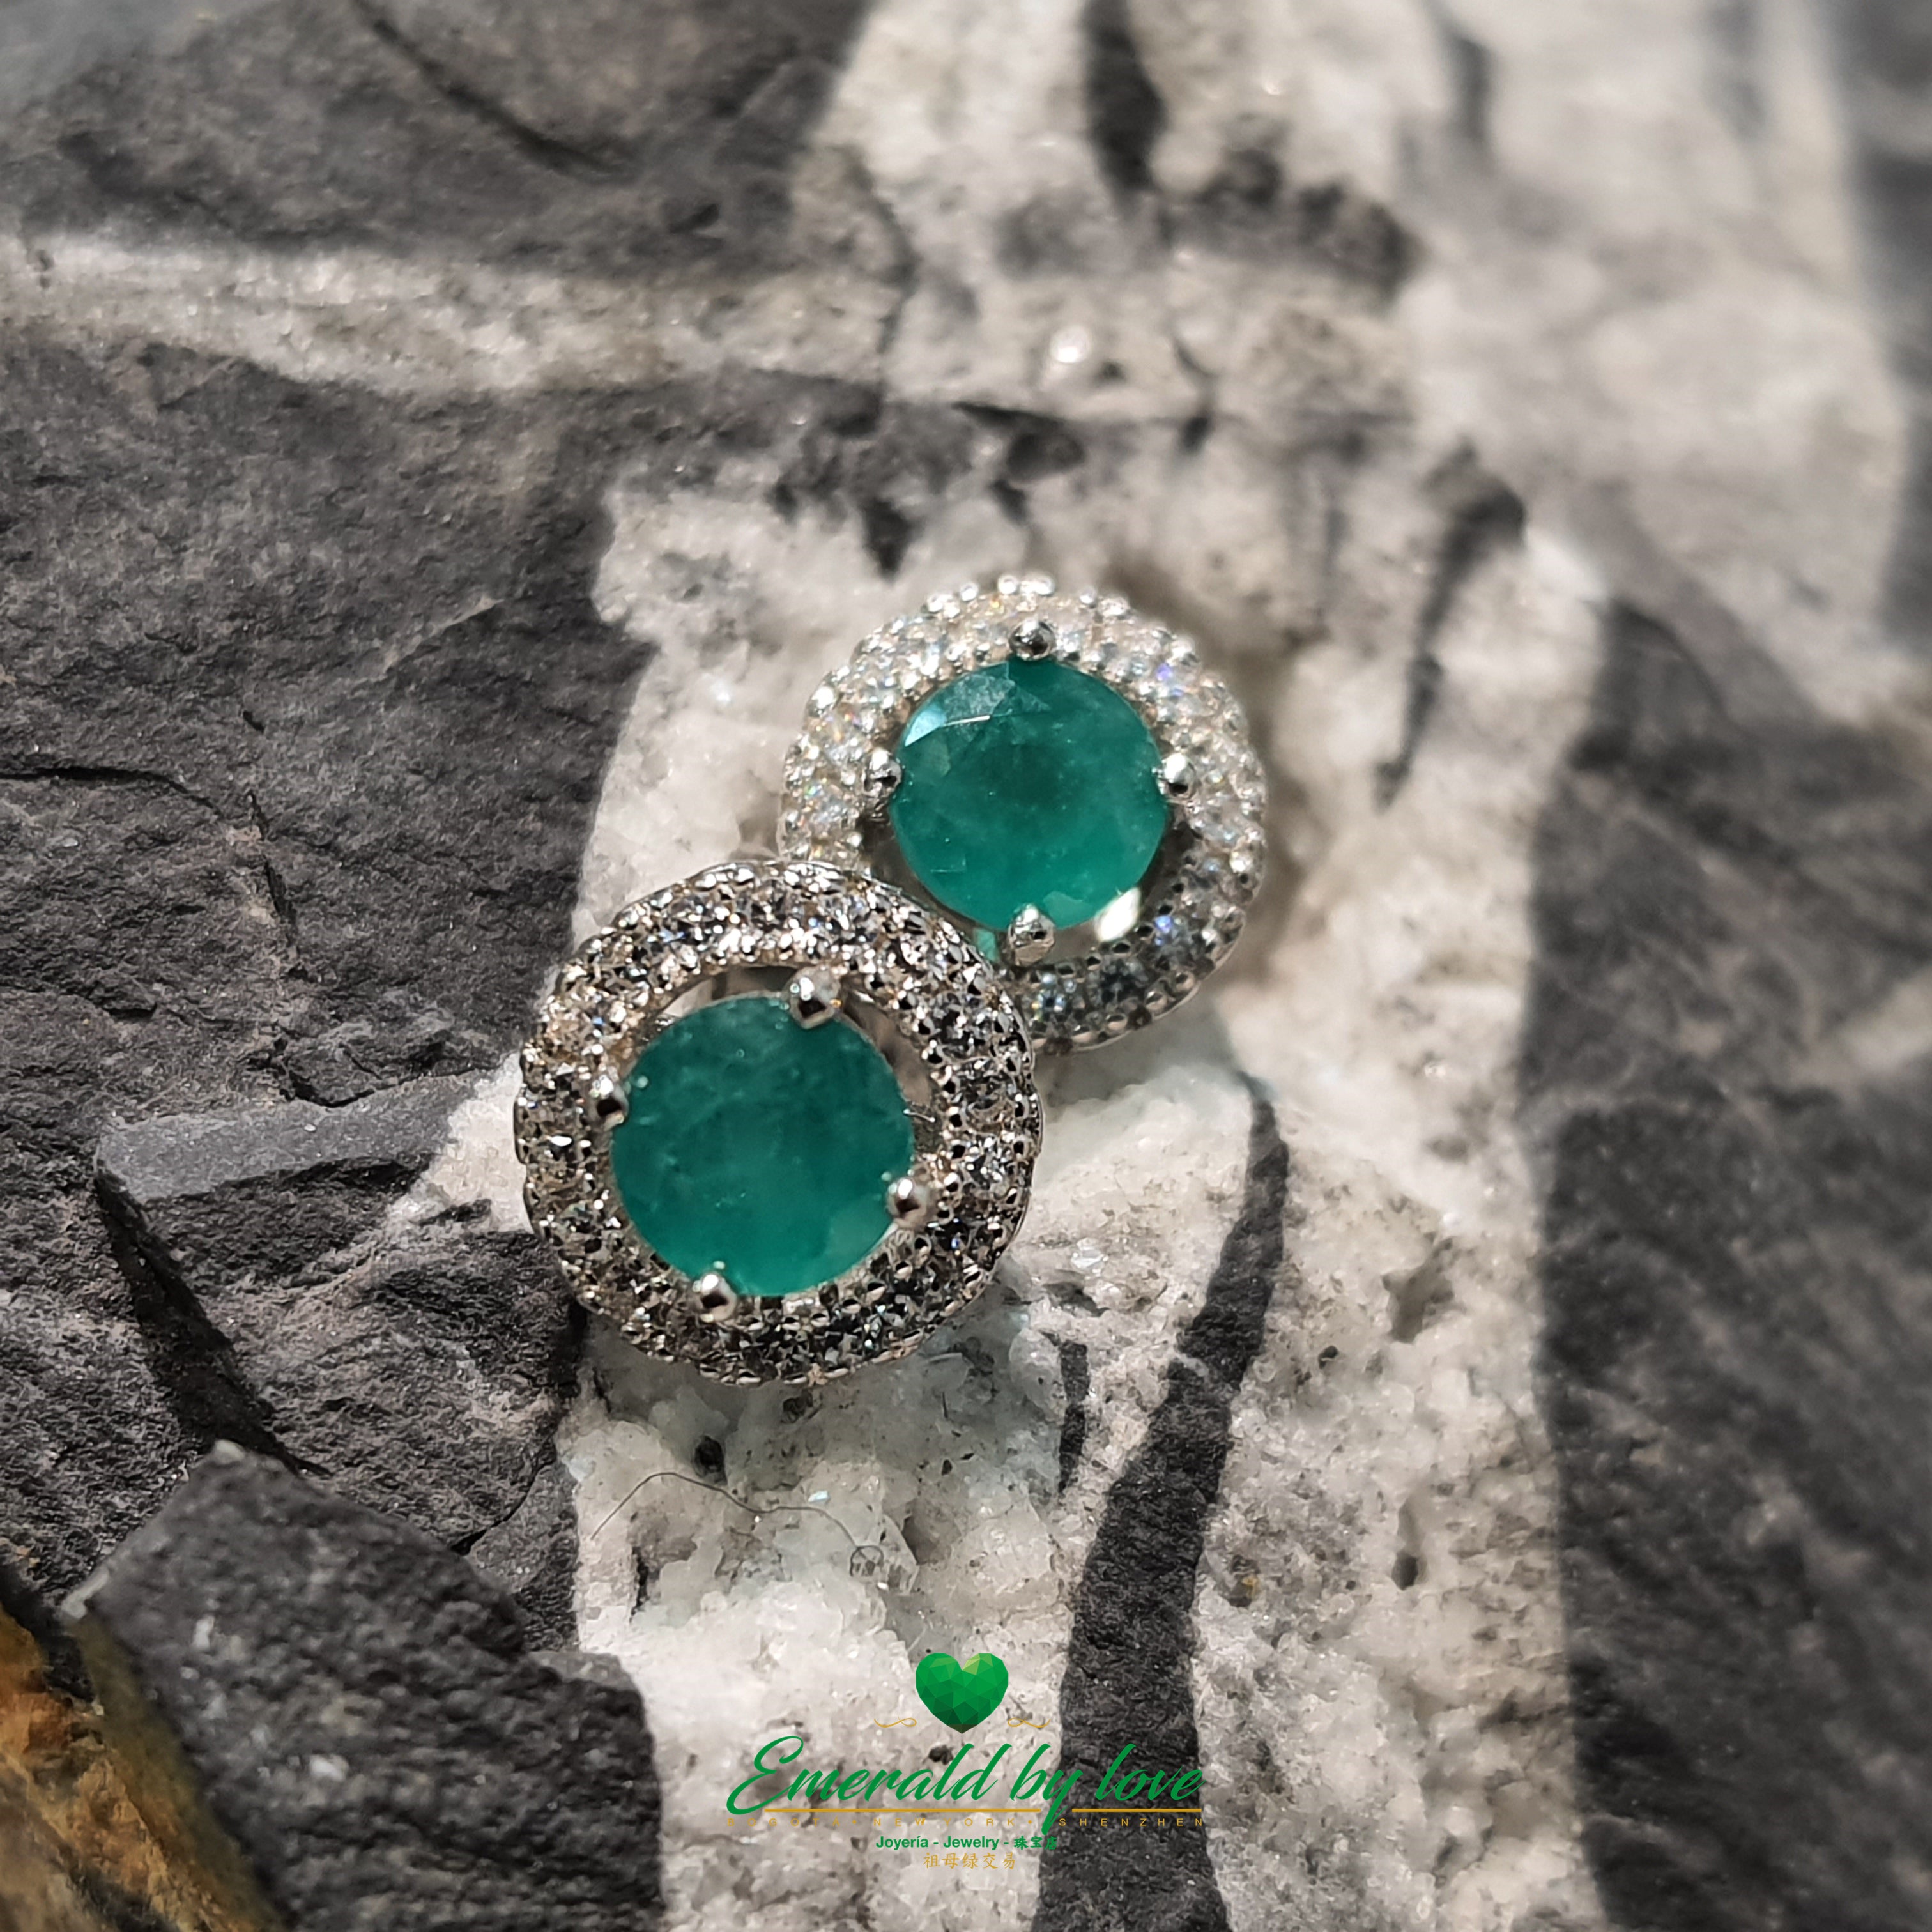 Sterling Silver Marquise Earrings with Round Central Emerald in Four-Prong Setting